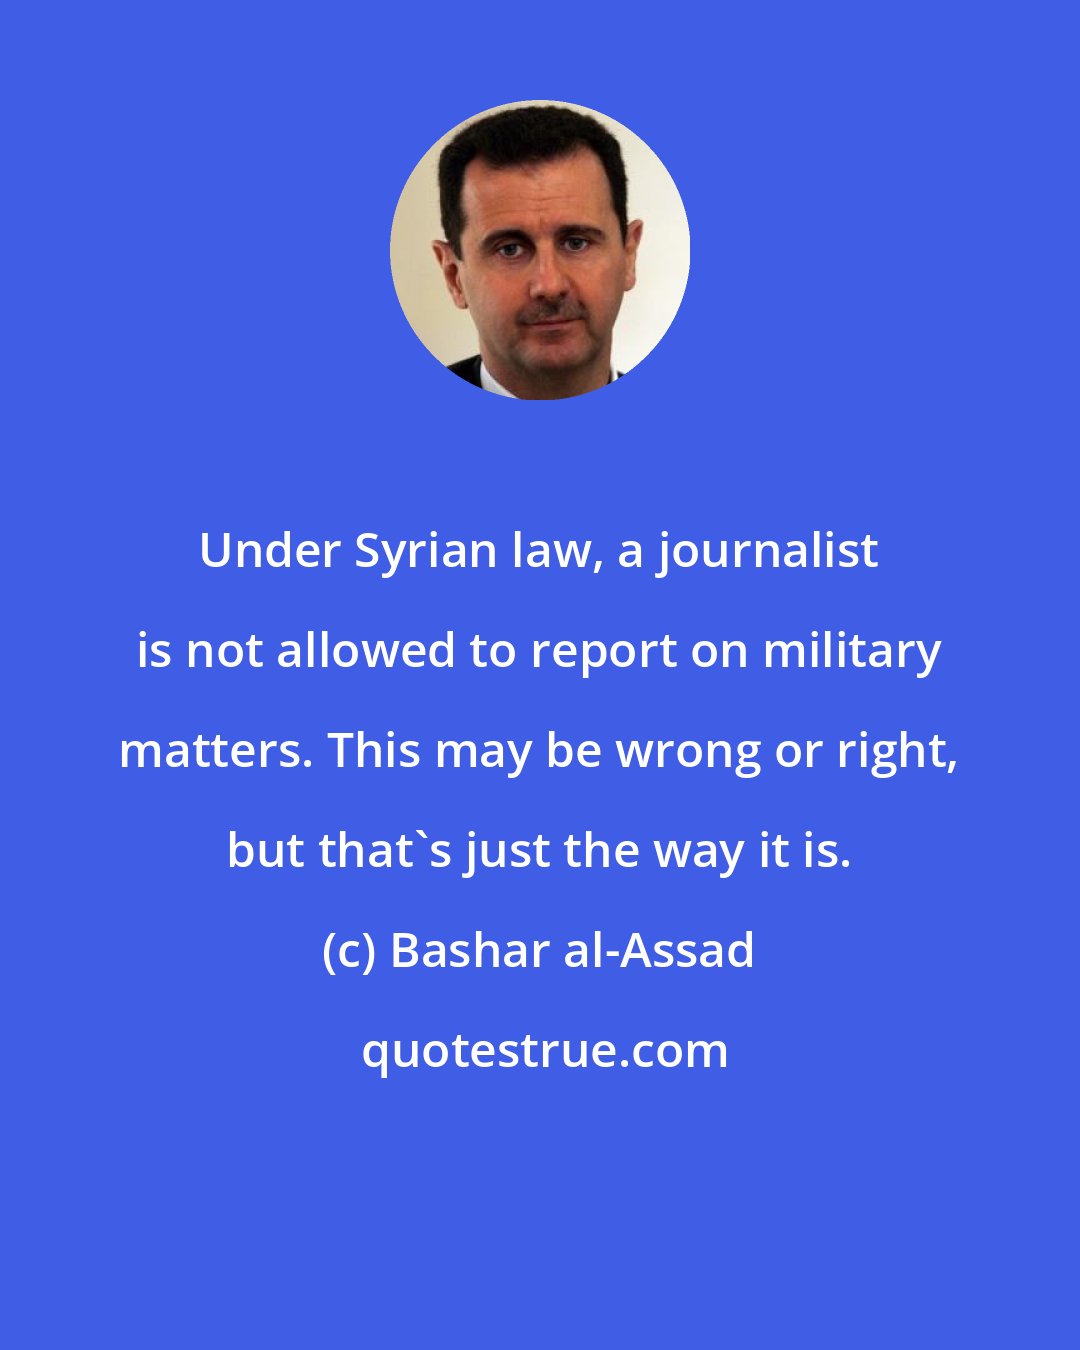 Bashar al-Assad: Under Syrian law, a journalist is not allowed to report on military matters. This may be wrong or right, but that's just the way it is.